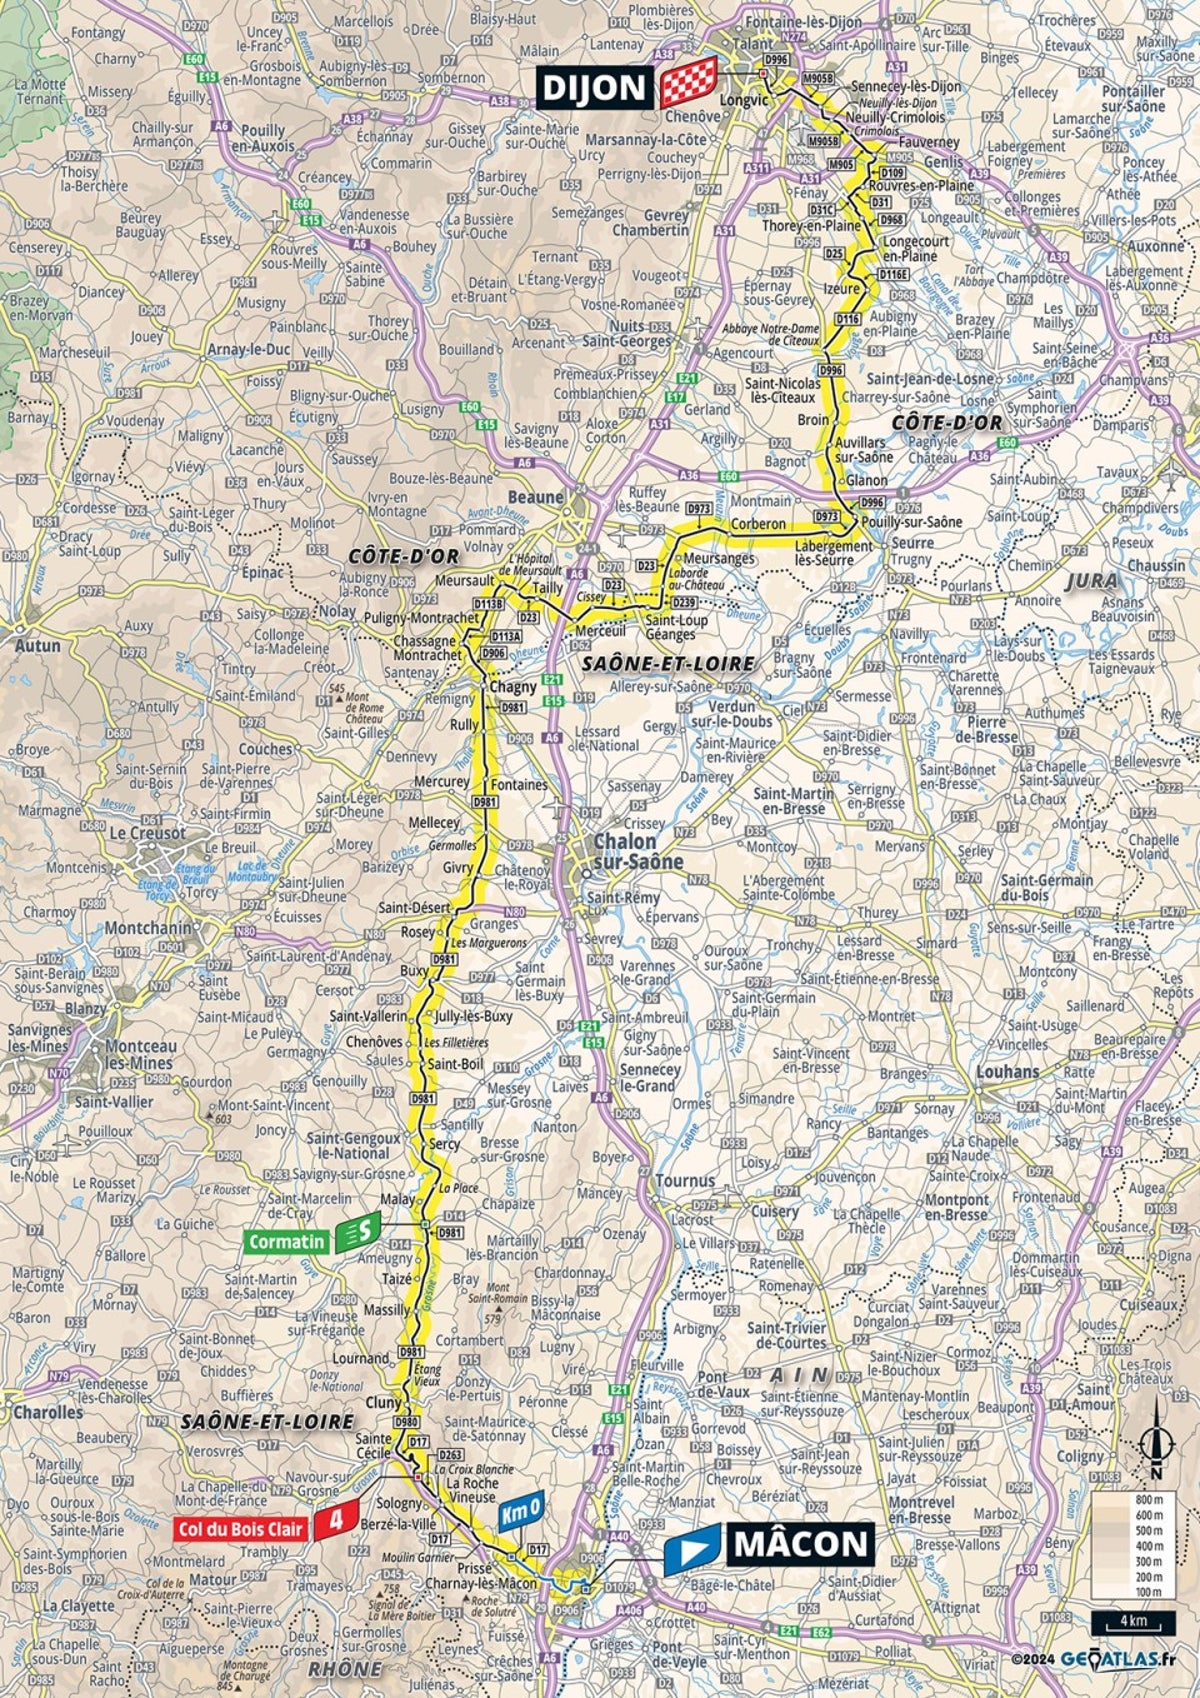 Tour de France stage 6 preview: Route map and profile with sprinters set to shine in Burgundy wine country